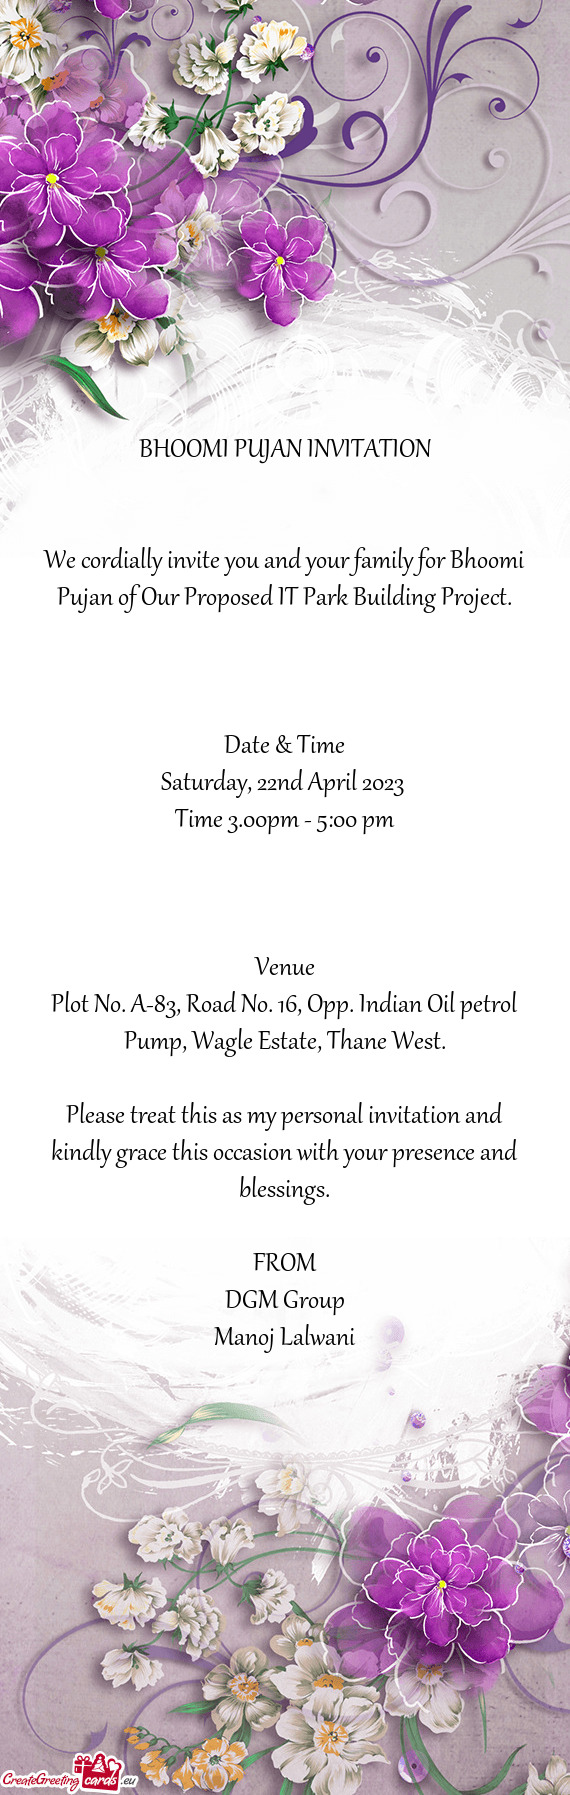 We cordially invite you and your family for Bhoomi Pujan of Our Proposed IT Park Building Project